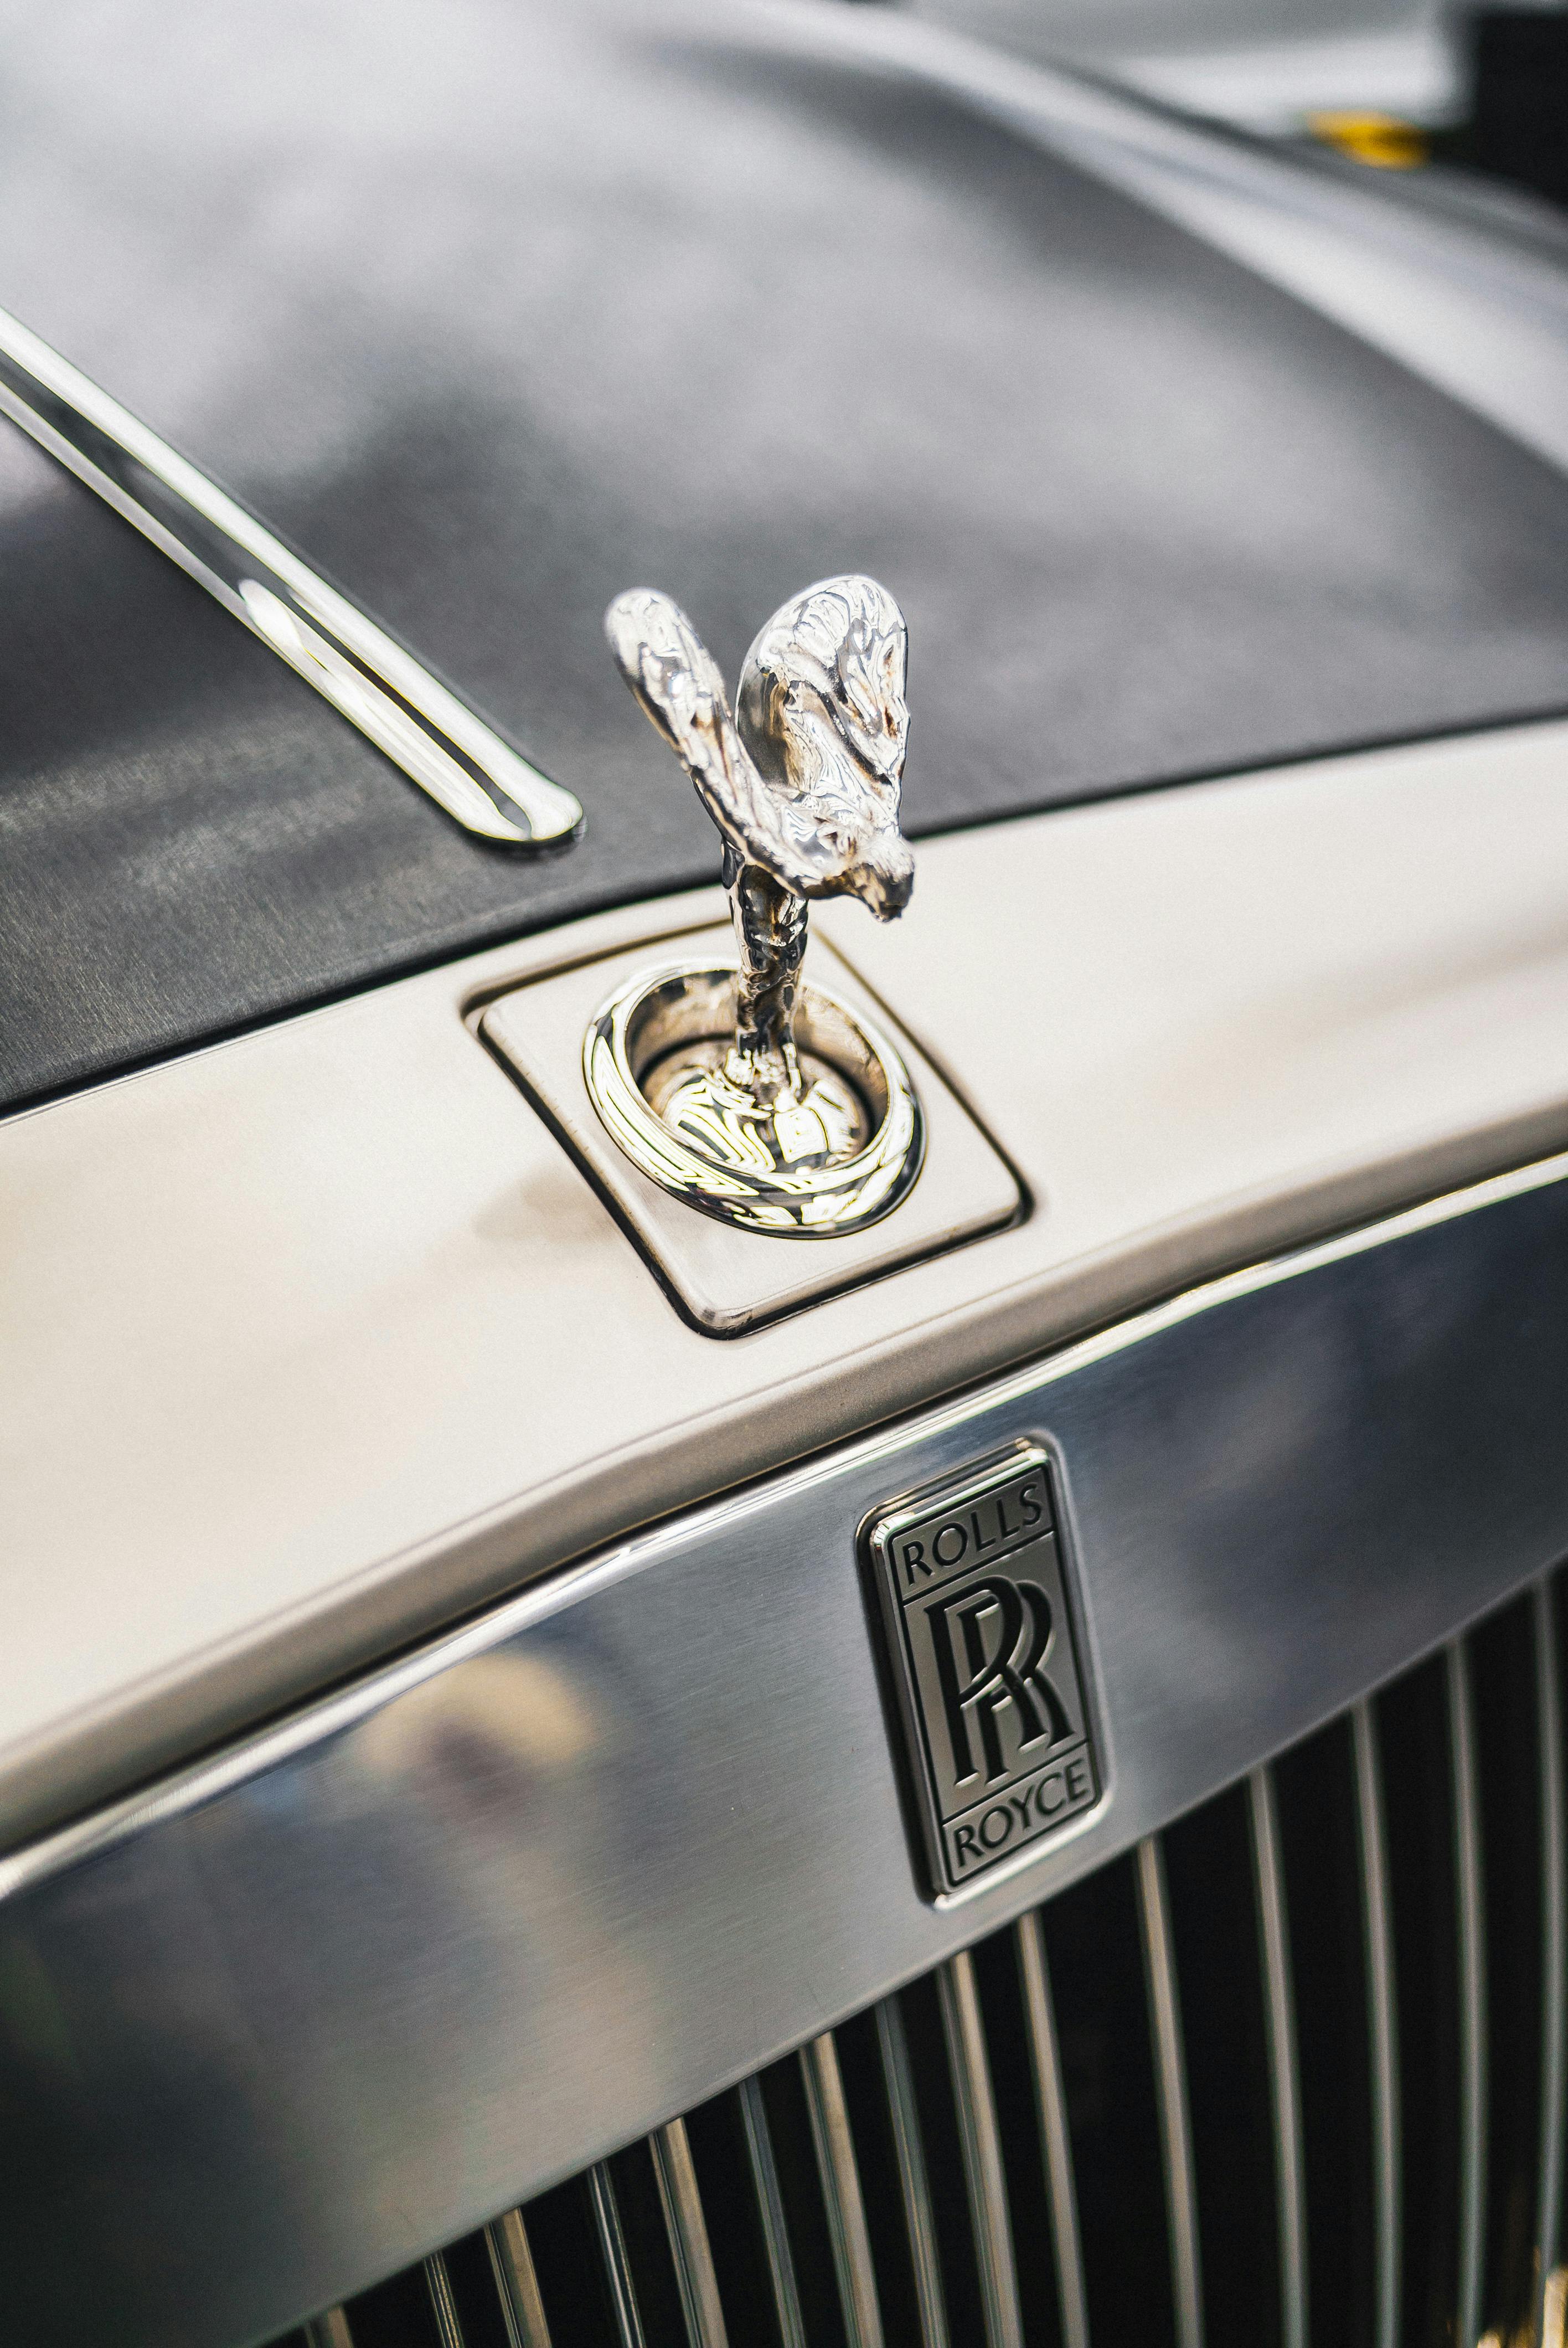 540+ Rolls Royce HD Wallpapers and Backgrounds | Rolls royce, Rolls royce  wallpaper, Rolls royce cars